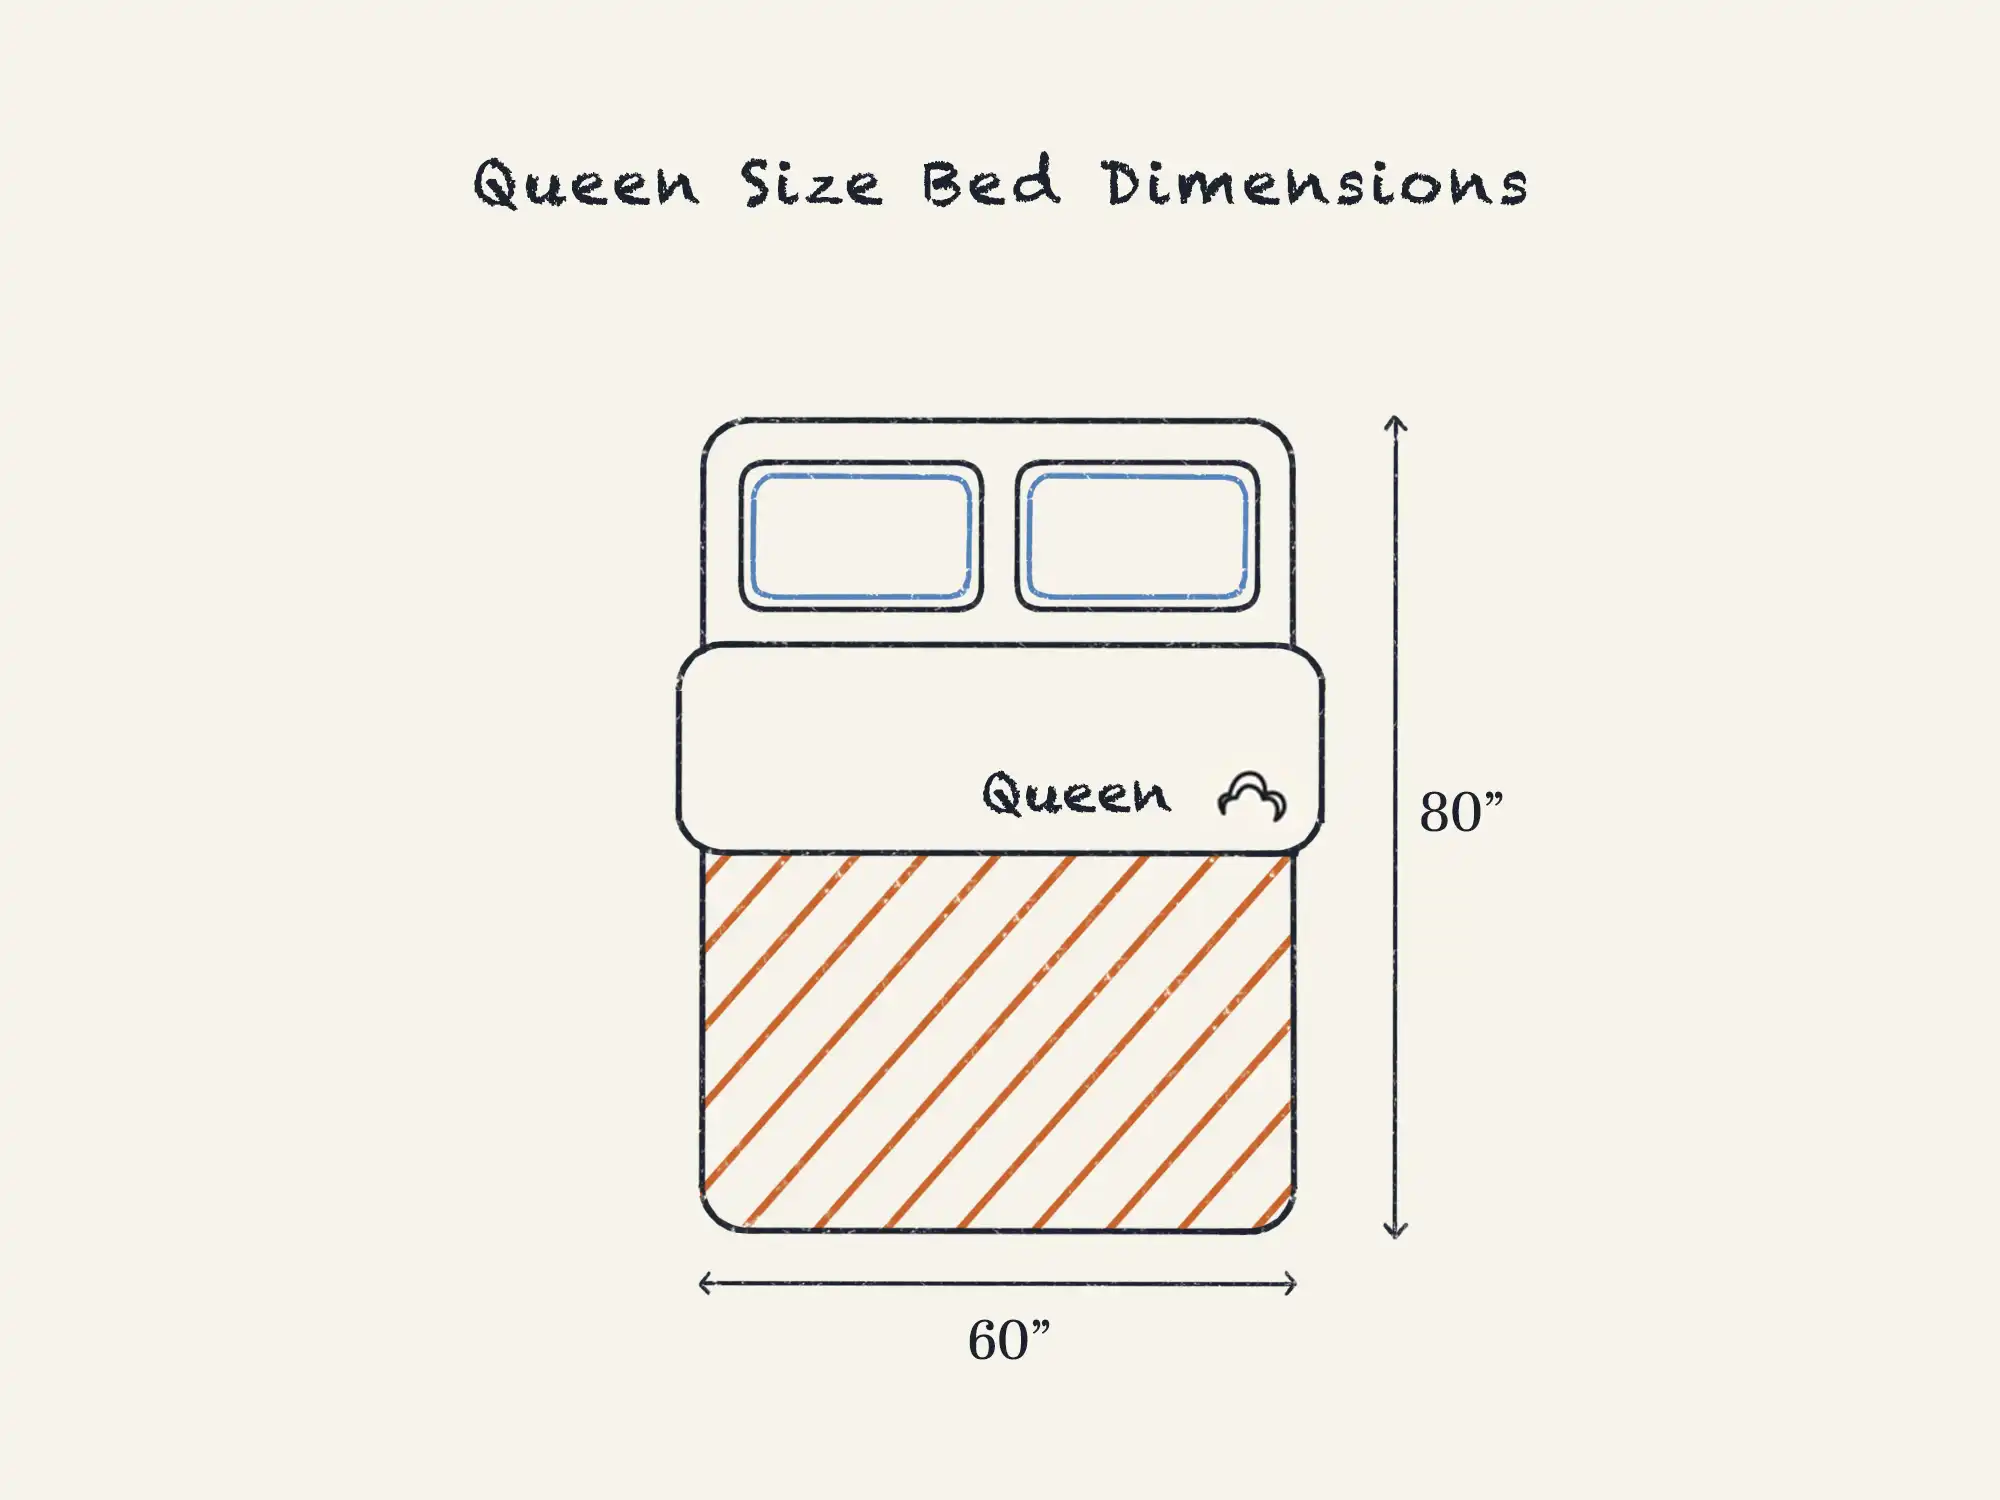 Queen Size Bed Dimensions Guide